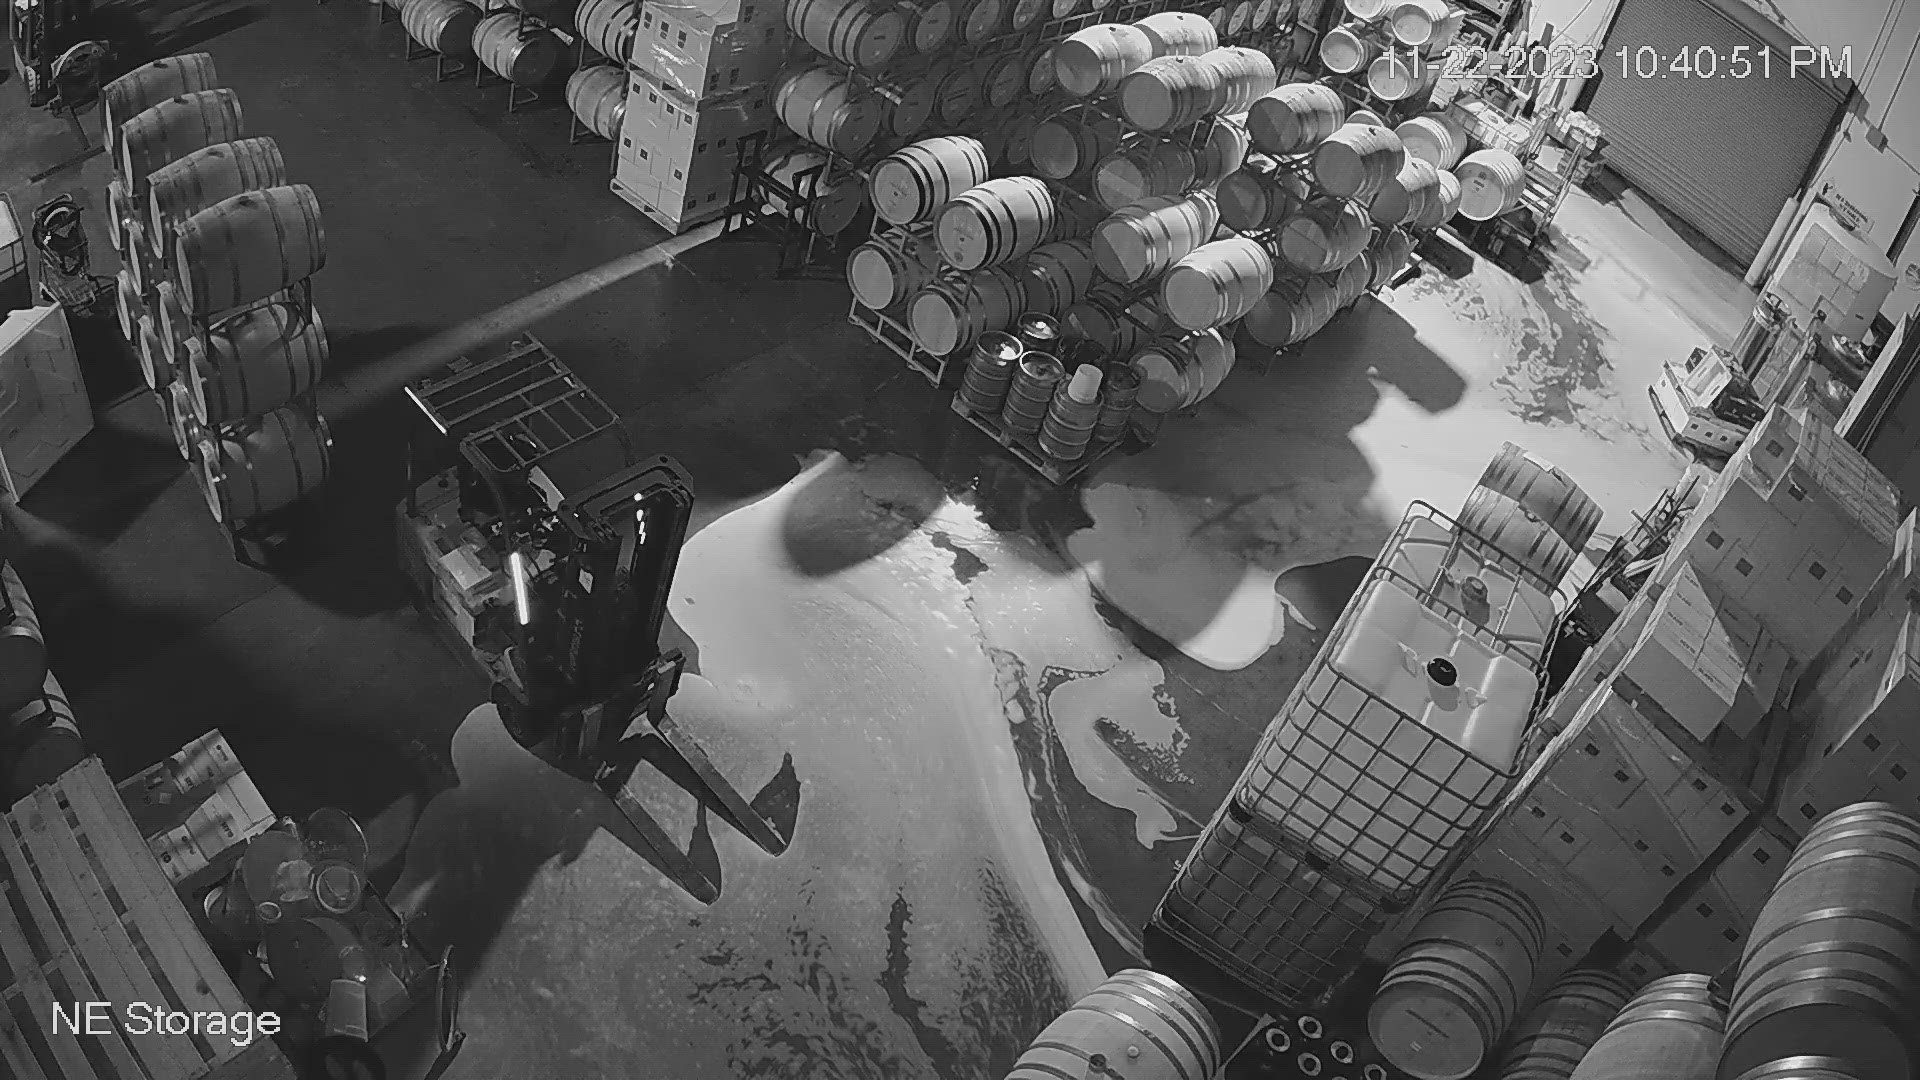 The winery shared exclusive surveillance video with KING 5 showing the suspect emptying roughly 5,000 gallons of its product.